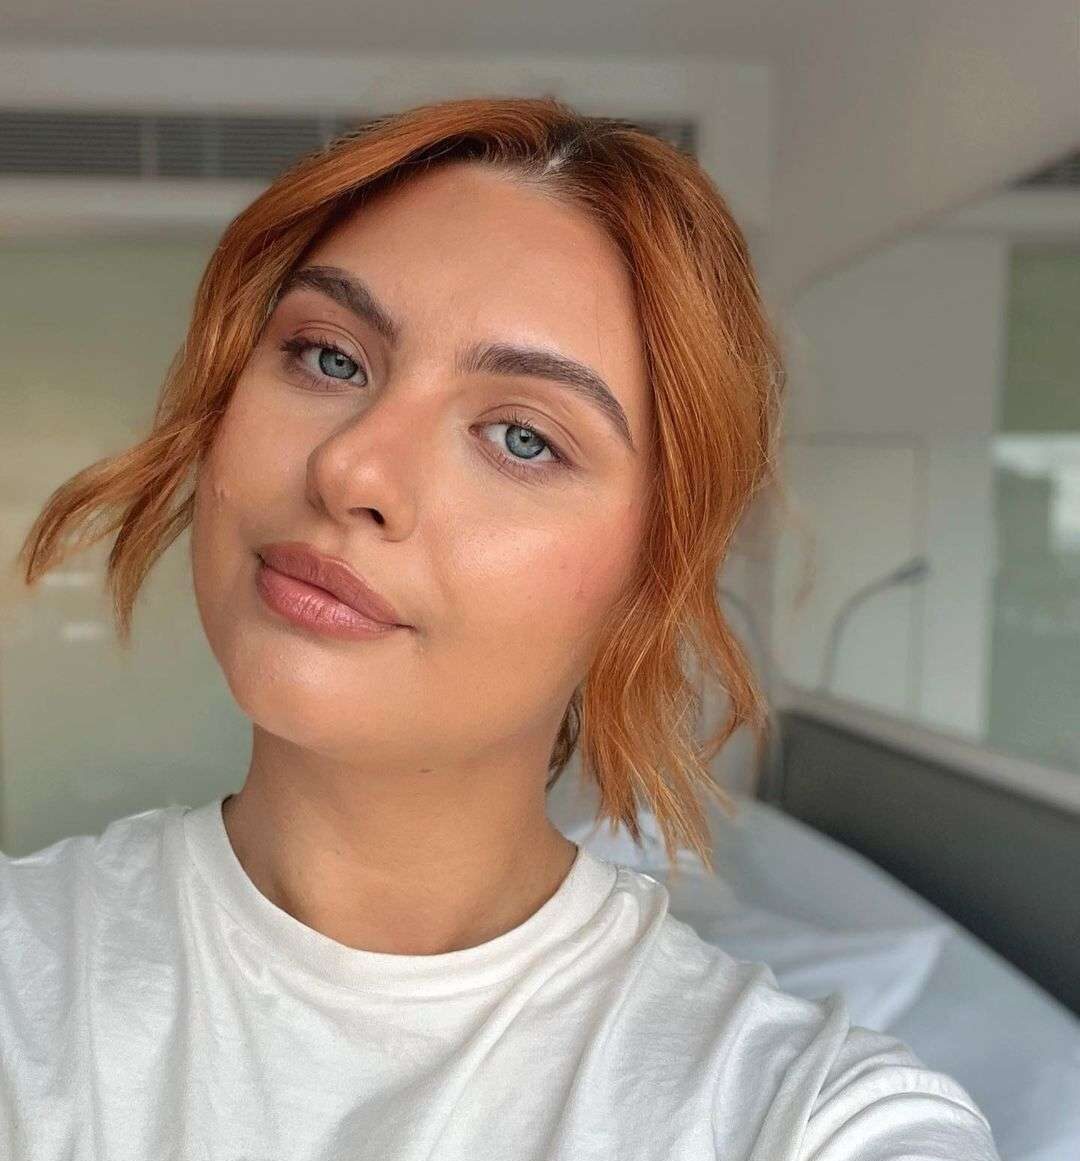 Julia in a white t-shirt while taking a selfie